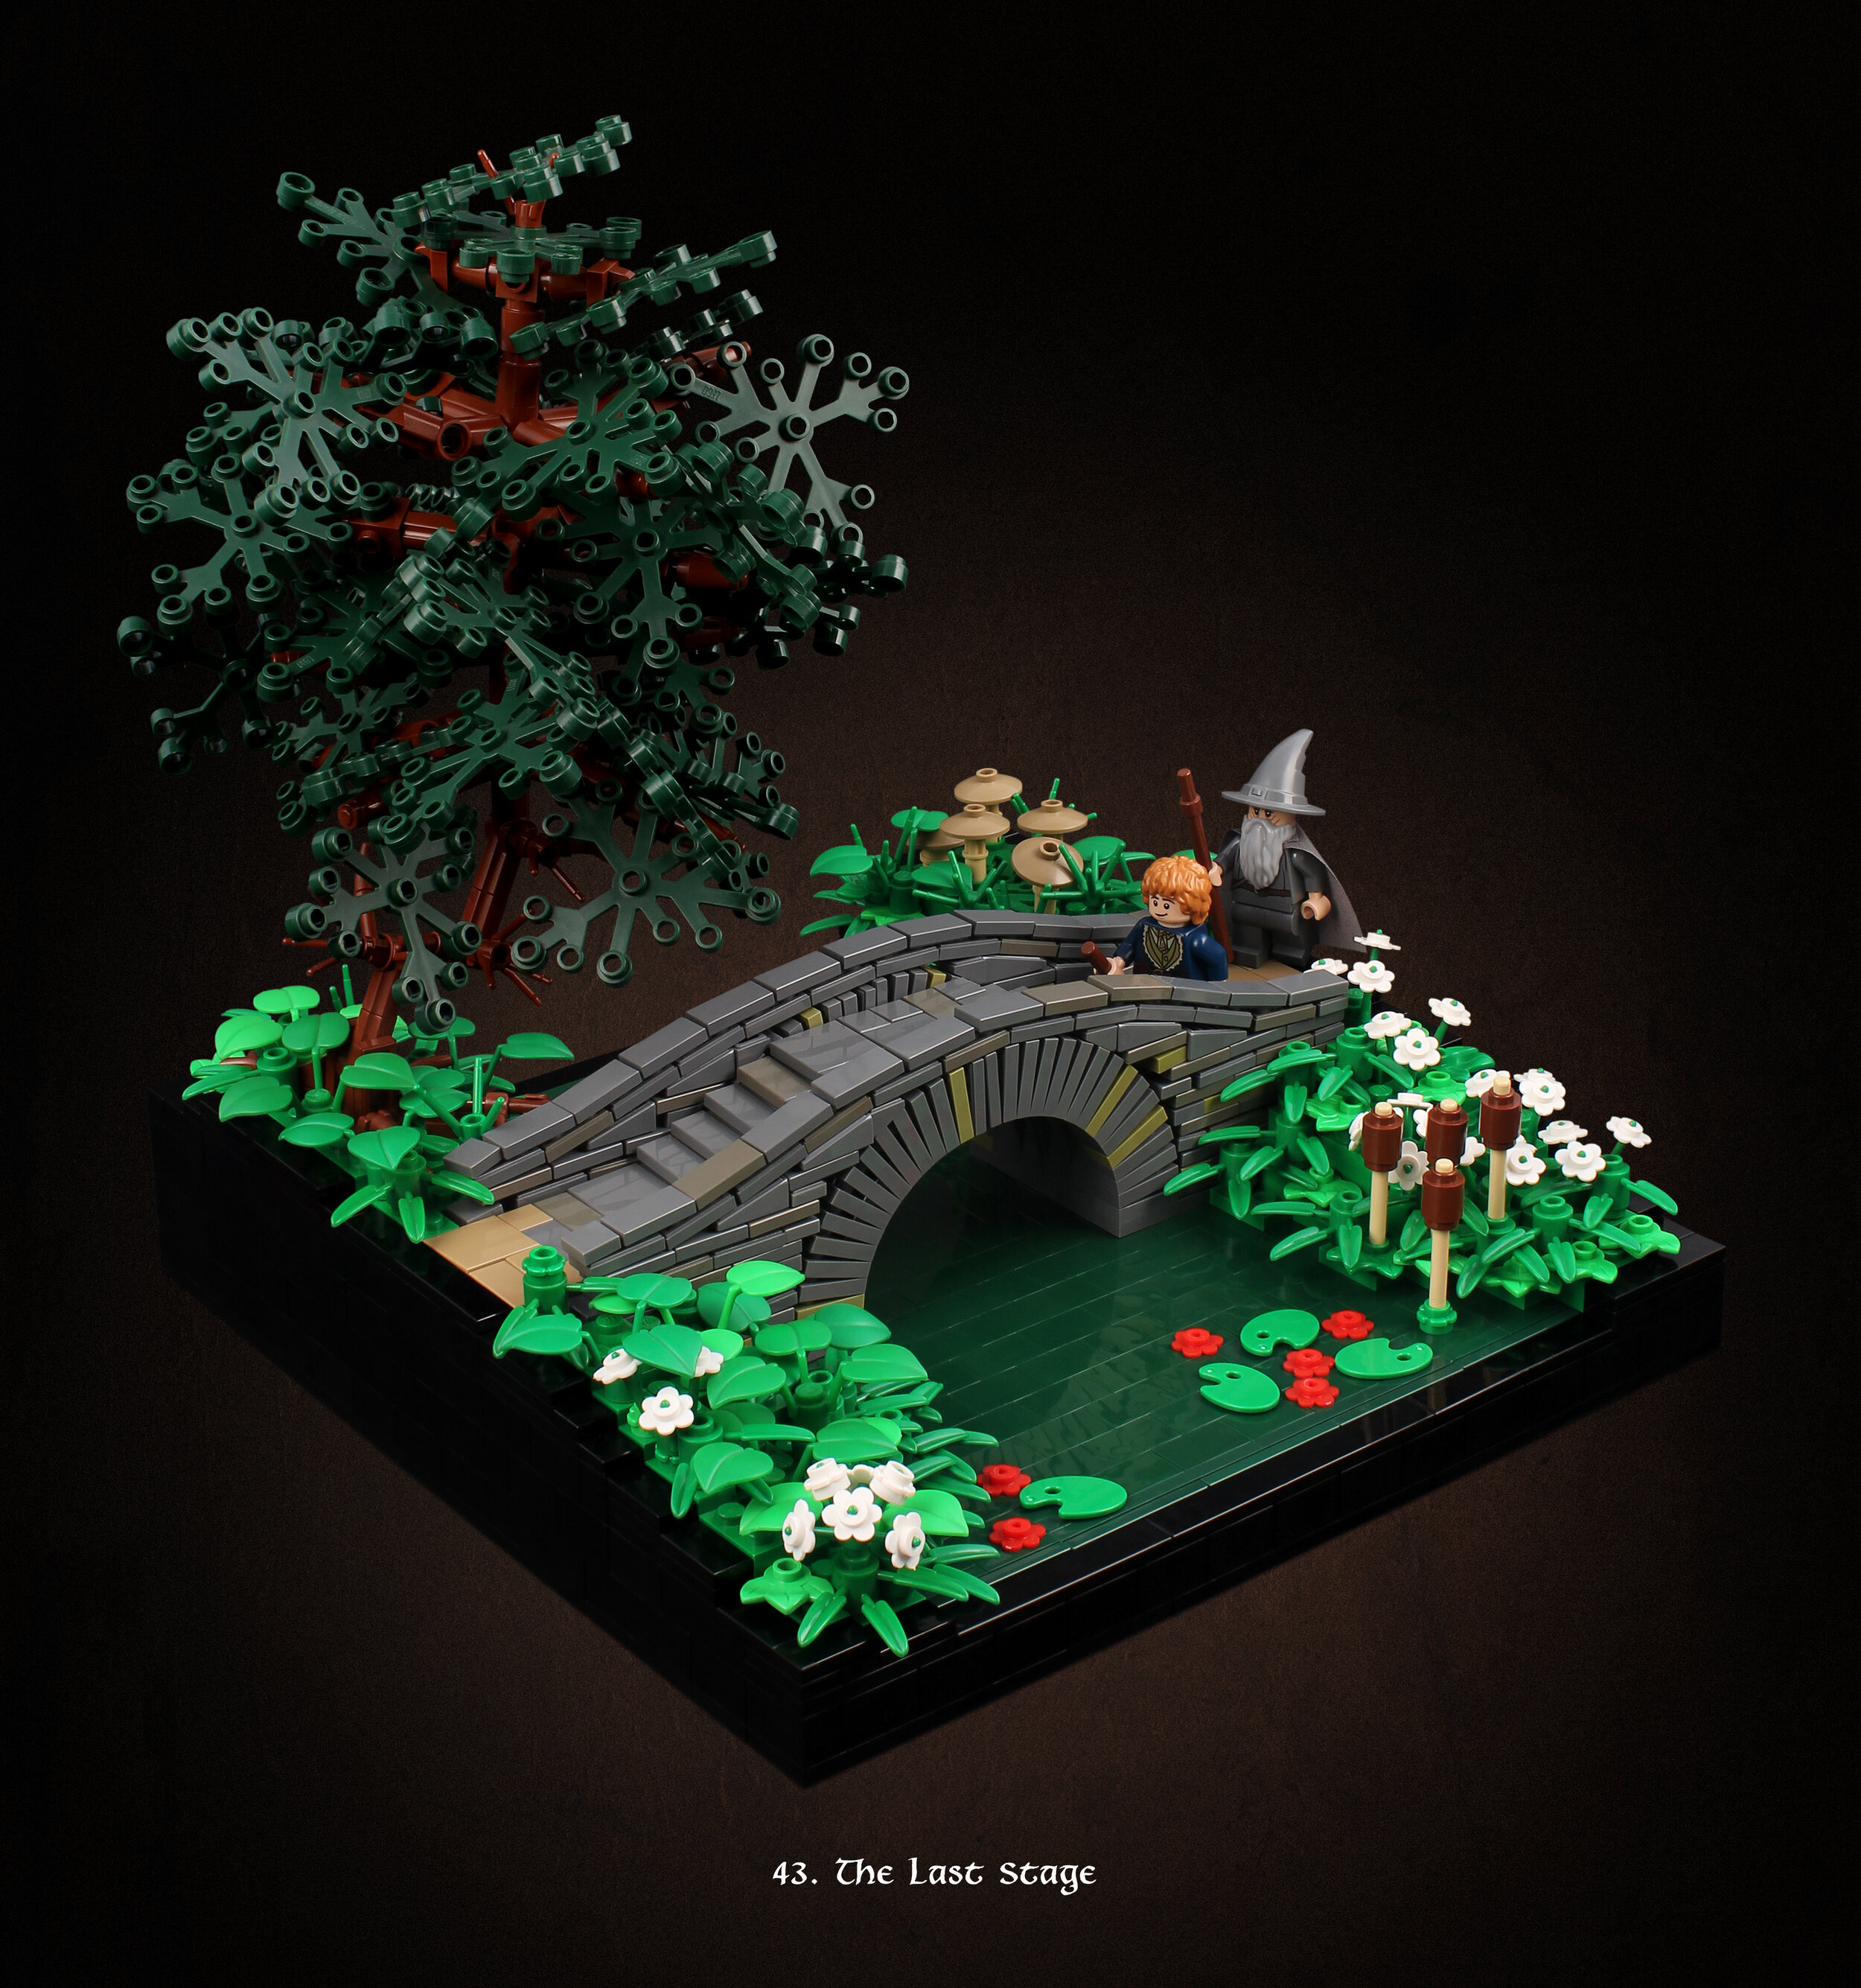 How many Lego bricks would it take to build a bridge between